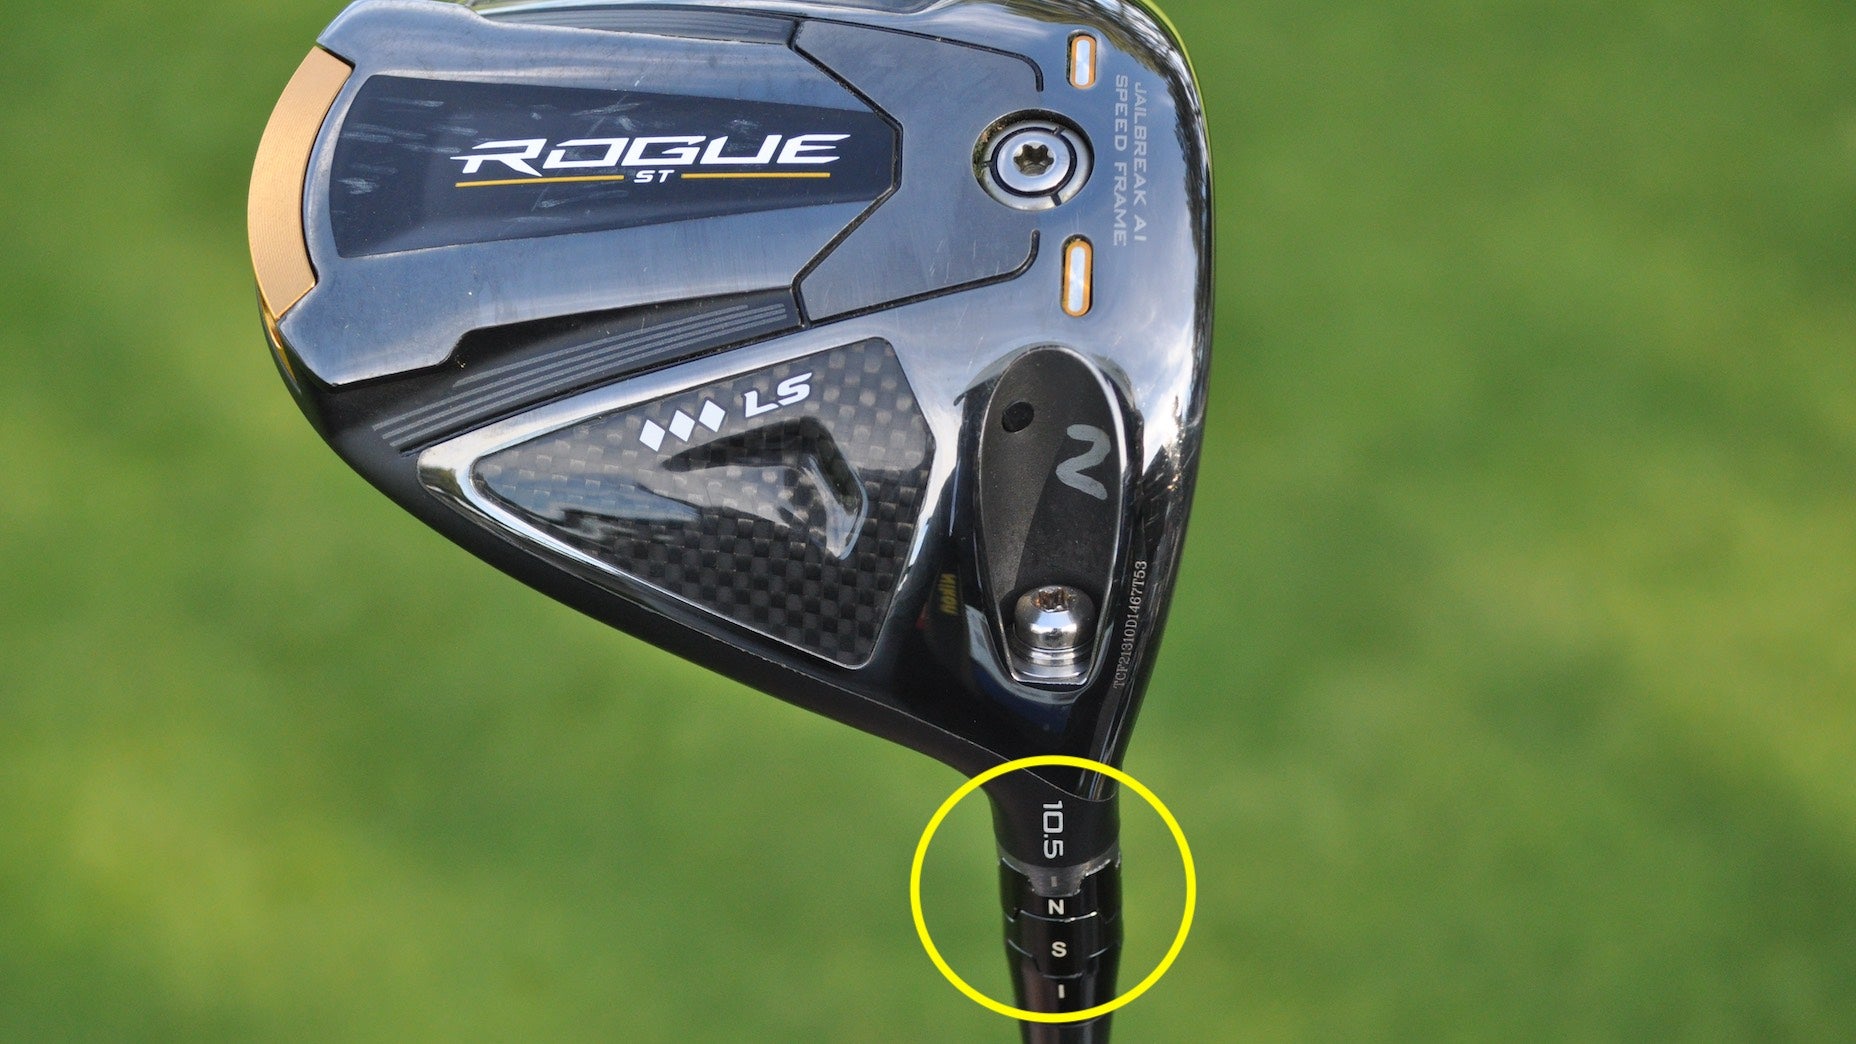 Inside Jon Rahm's golf bag: 7 things I noticed while inspecting his club